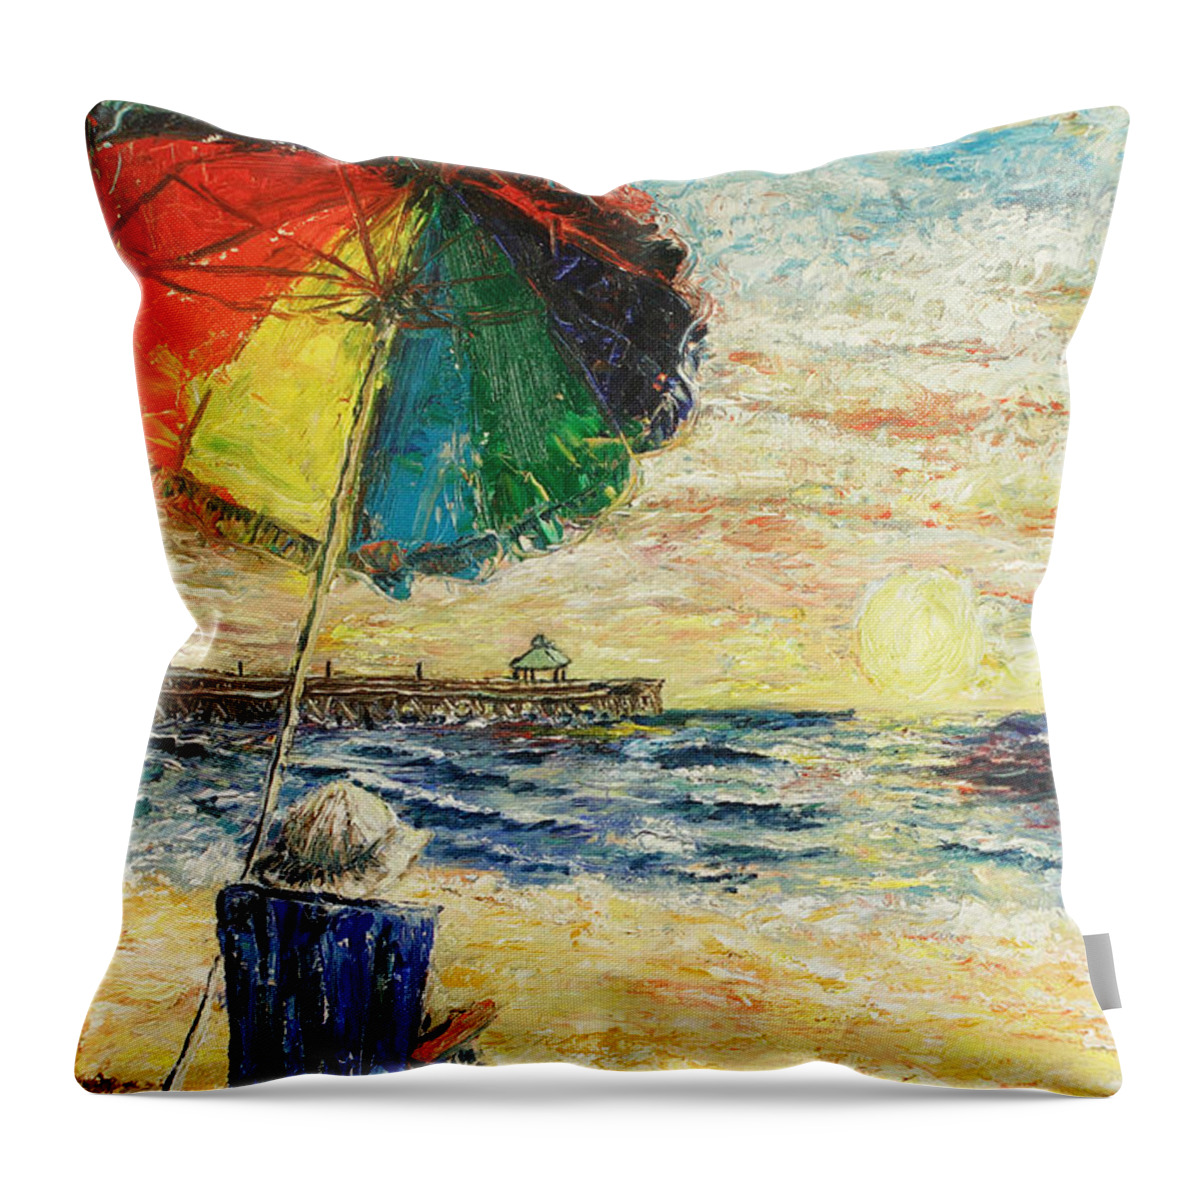 Umbrella Throw Pillow featuring the painting Umbrella Sunrise by Janis Lee Colon